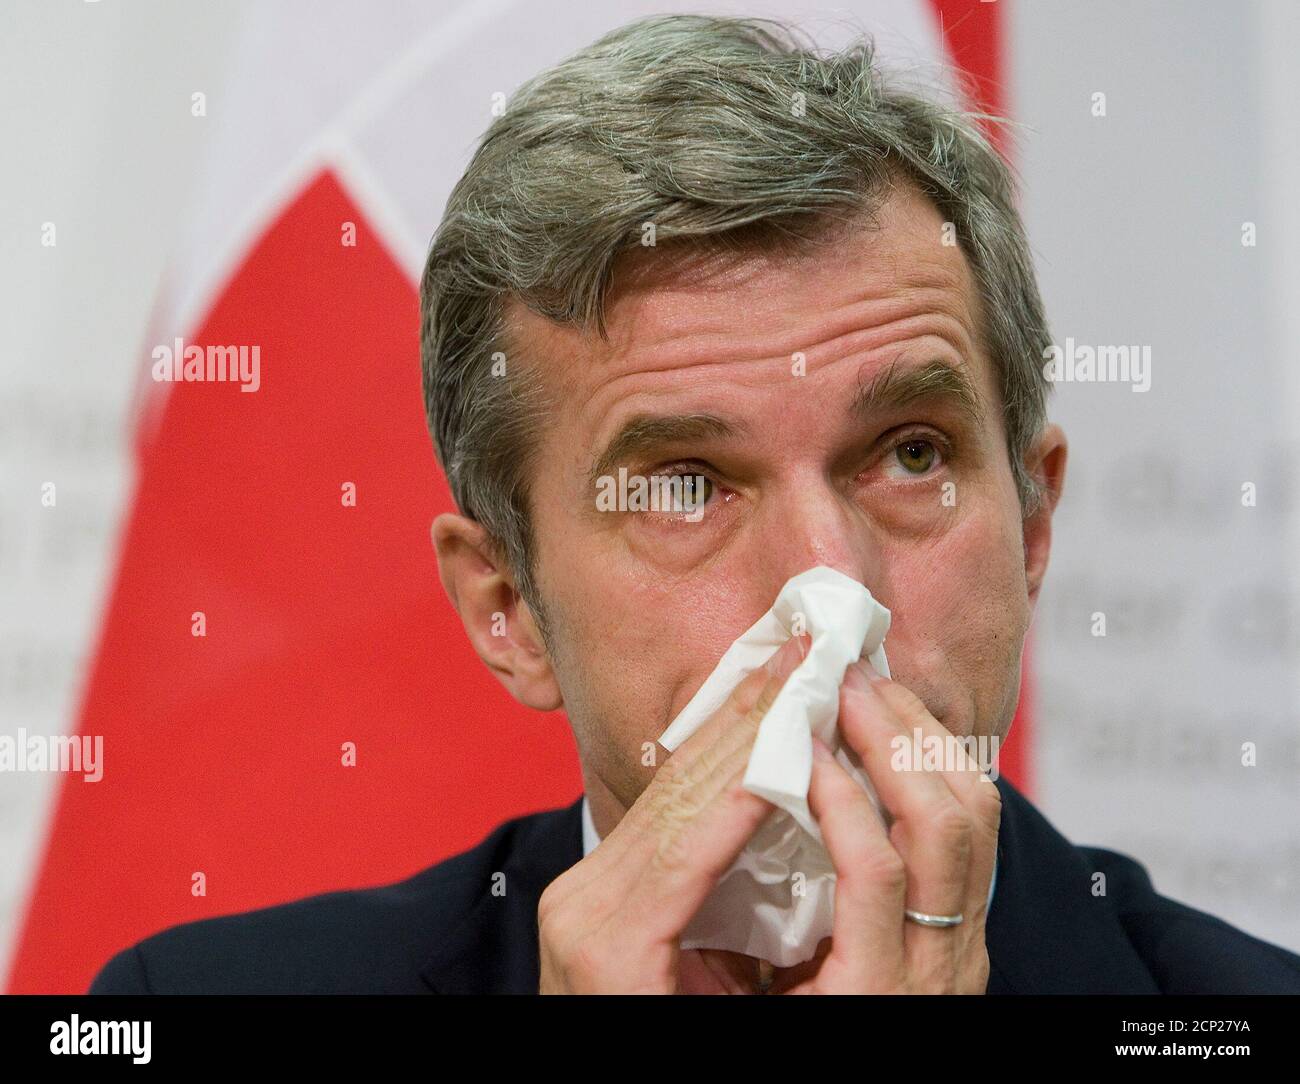 Thomas Zeltner, Director of the Federal Office of Public Health (BAG) blows his nose during a news conference on the popular vote ' Yes to the complementary medicine' ('Ja zur Komplementaermedizin') in Bern April 9, 2009. REUTERS/Pascal Lauener (SWITZERLAND POLITICS HEADSHOT) Stock Photo